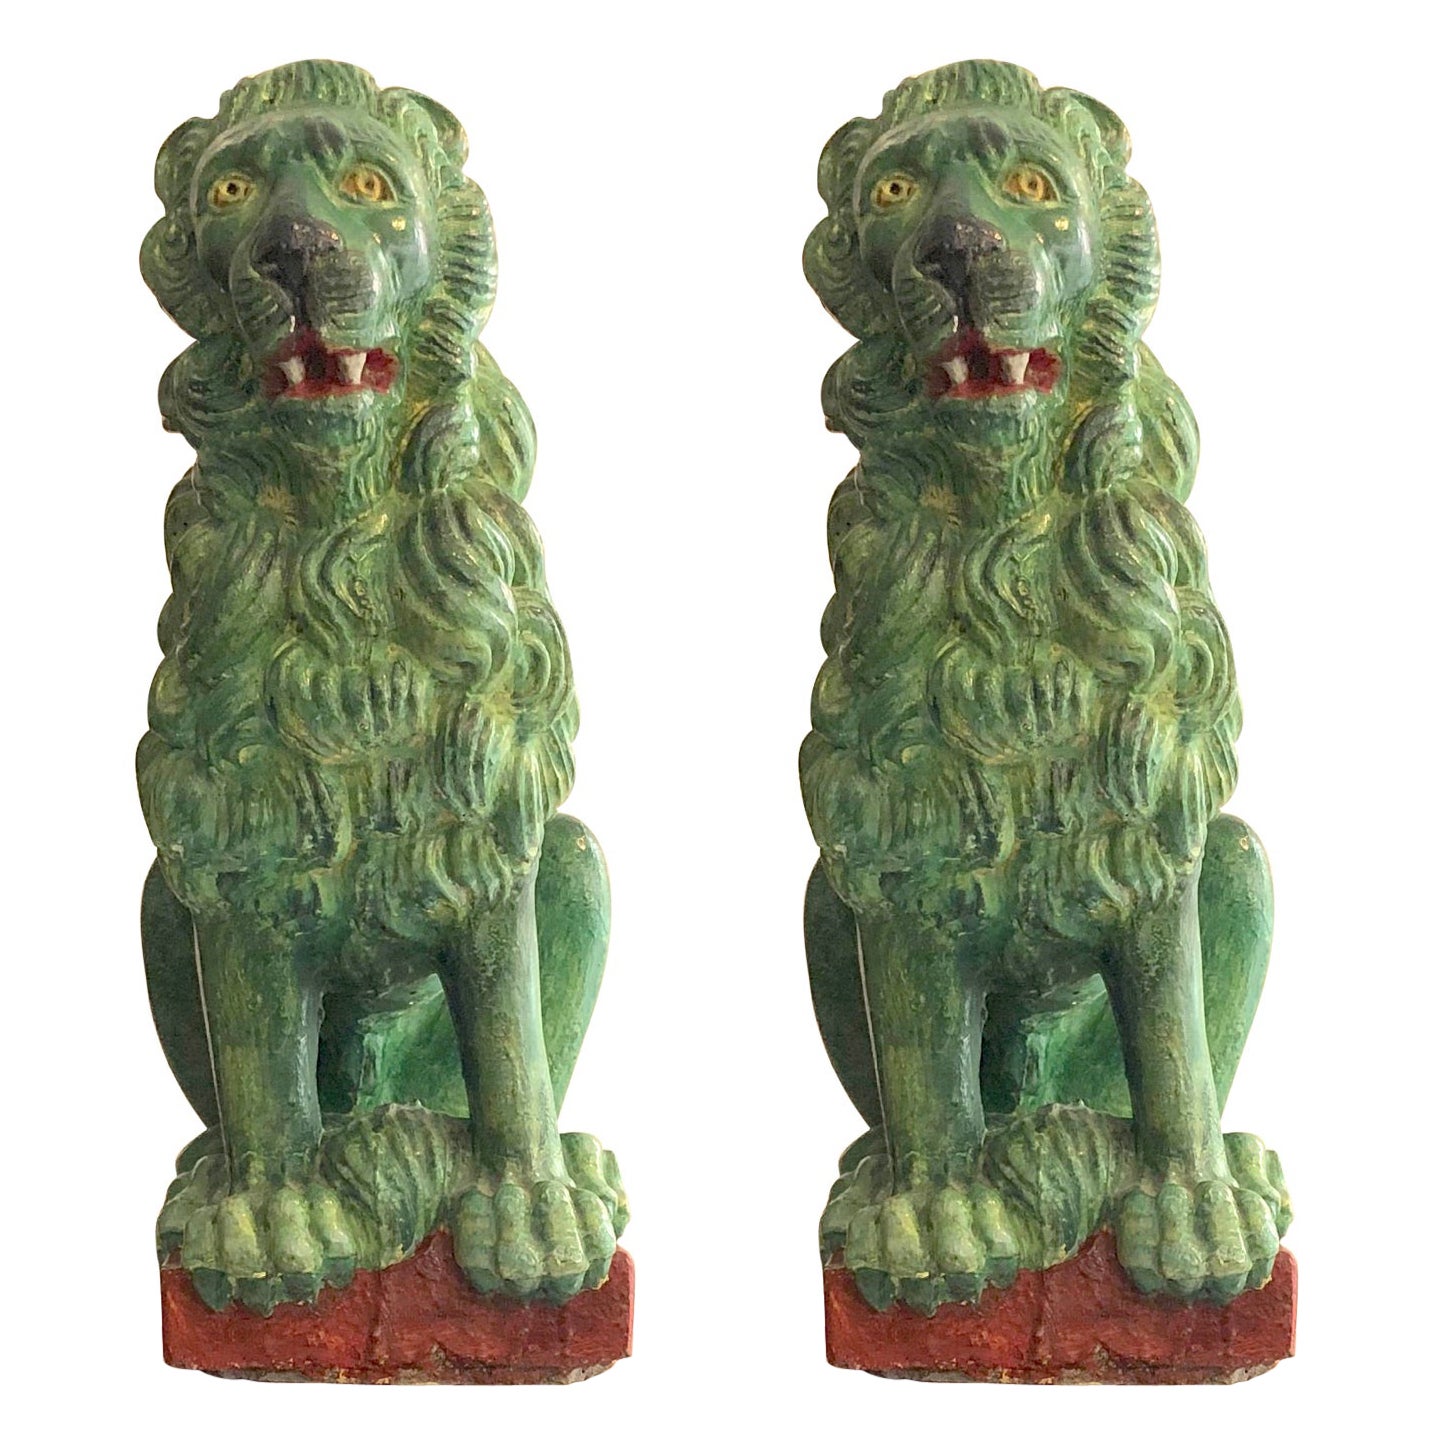 Pair of Antique Green Chinese Stone Cast Lions Sculptures Garden Ornaments